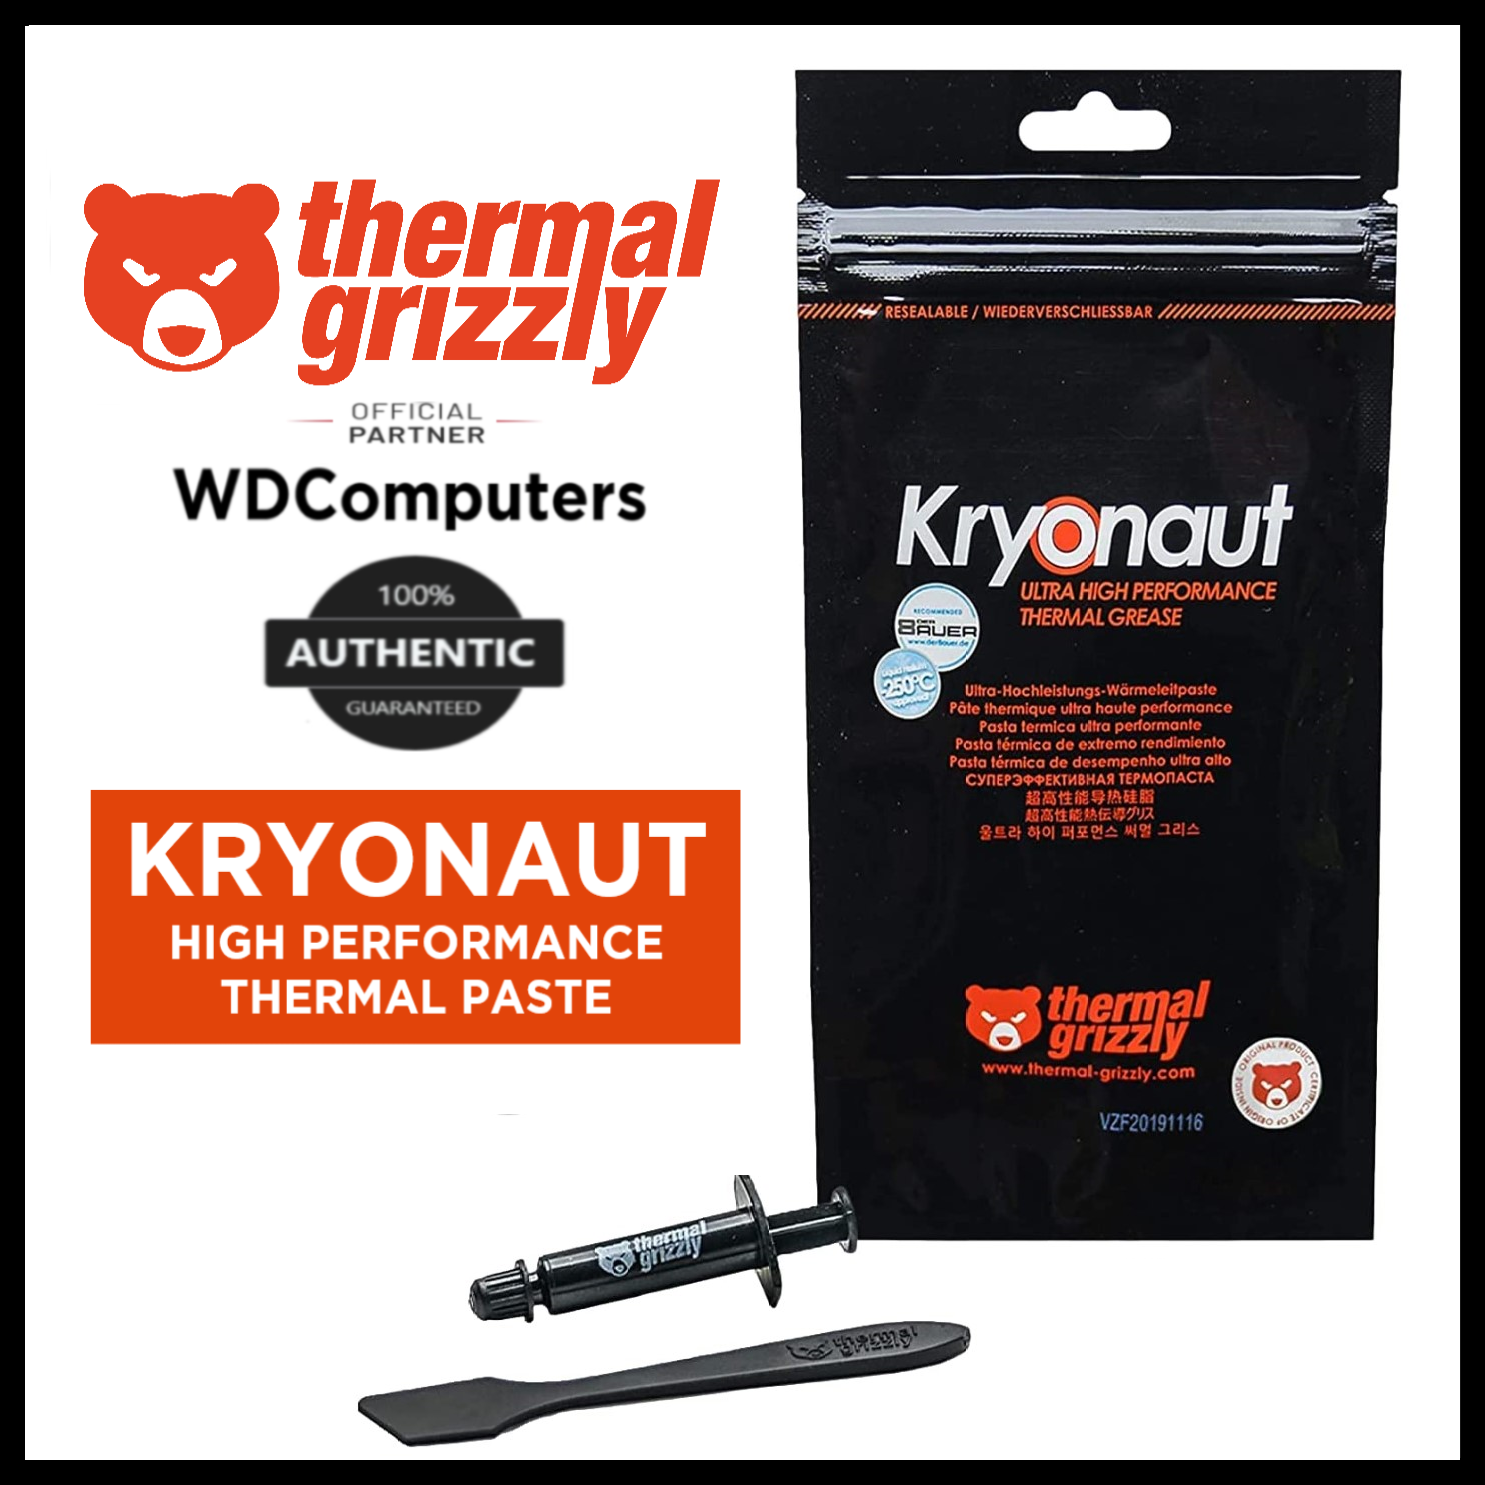 Thermal Grizzly - Kryonaut - 5.55 Gram/1.5 ml - Extremly High Performance  Thermal Paste - for Demanding Applications and Overclocking